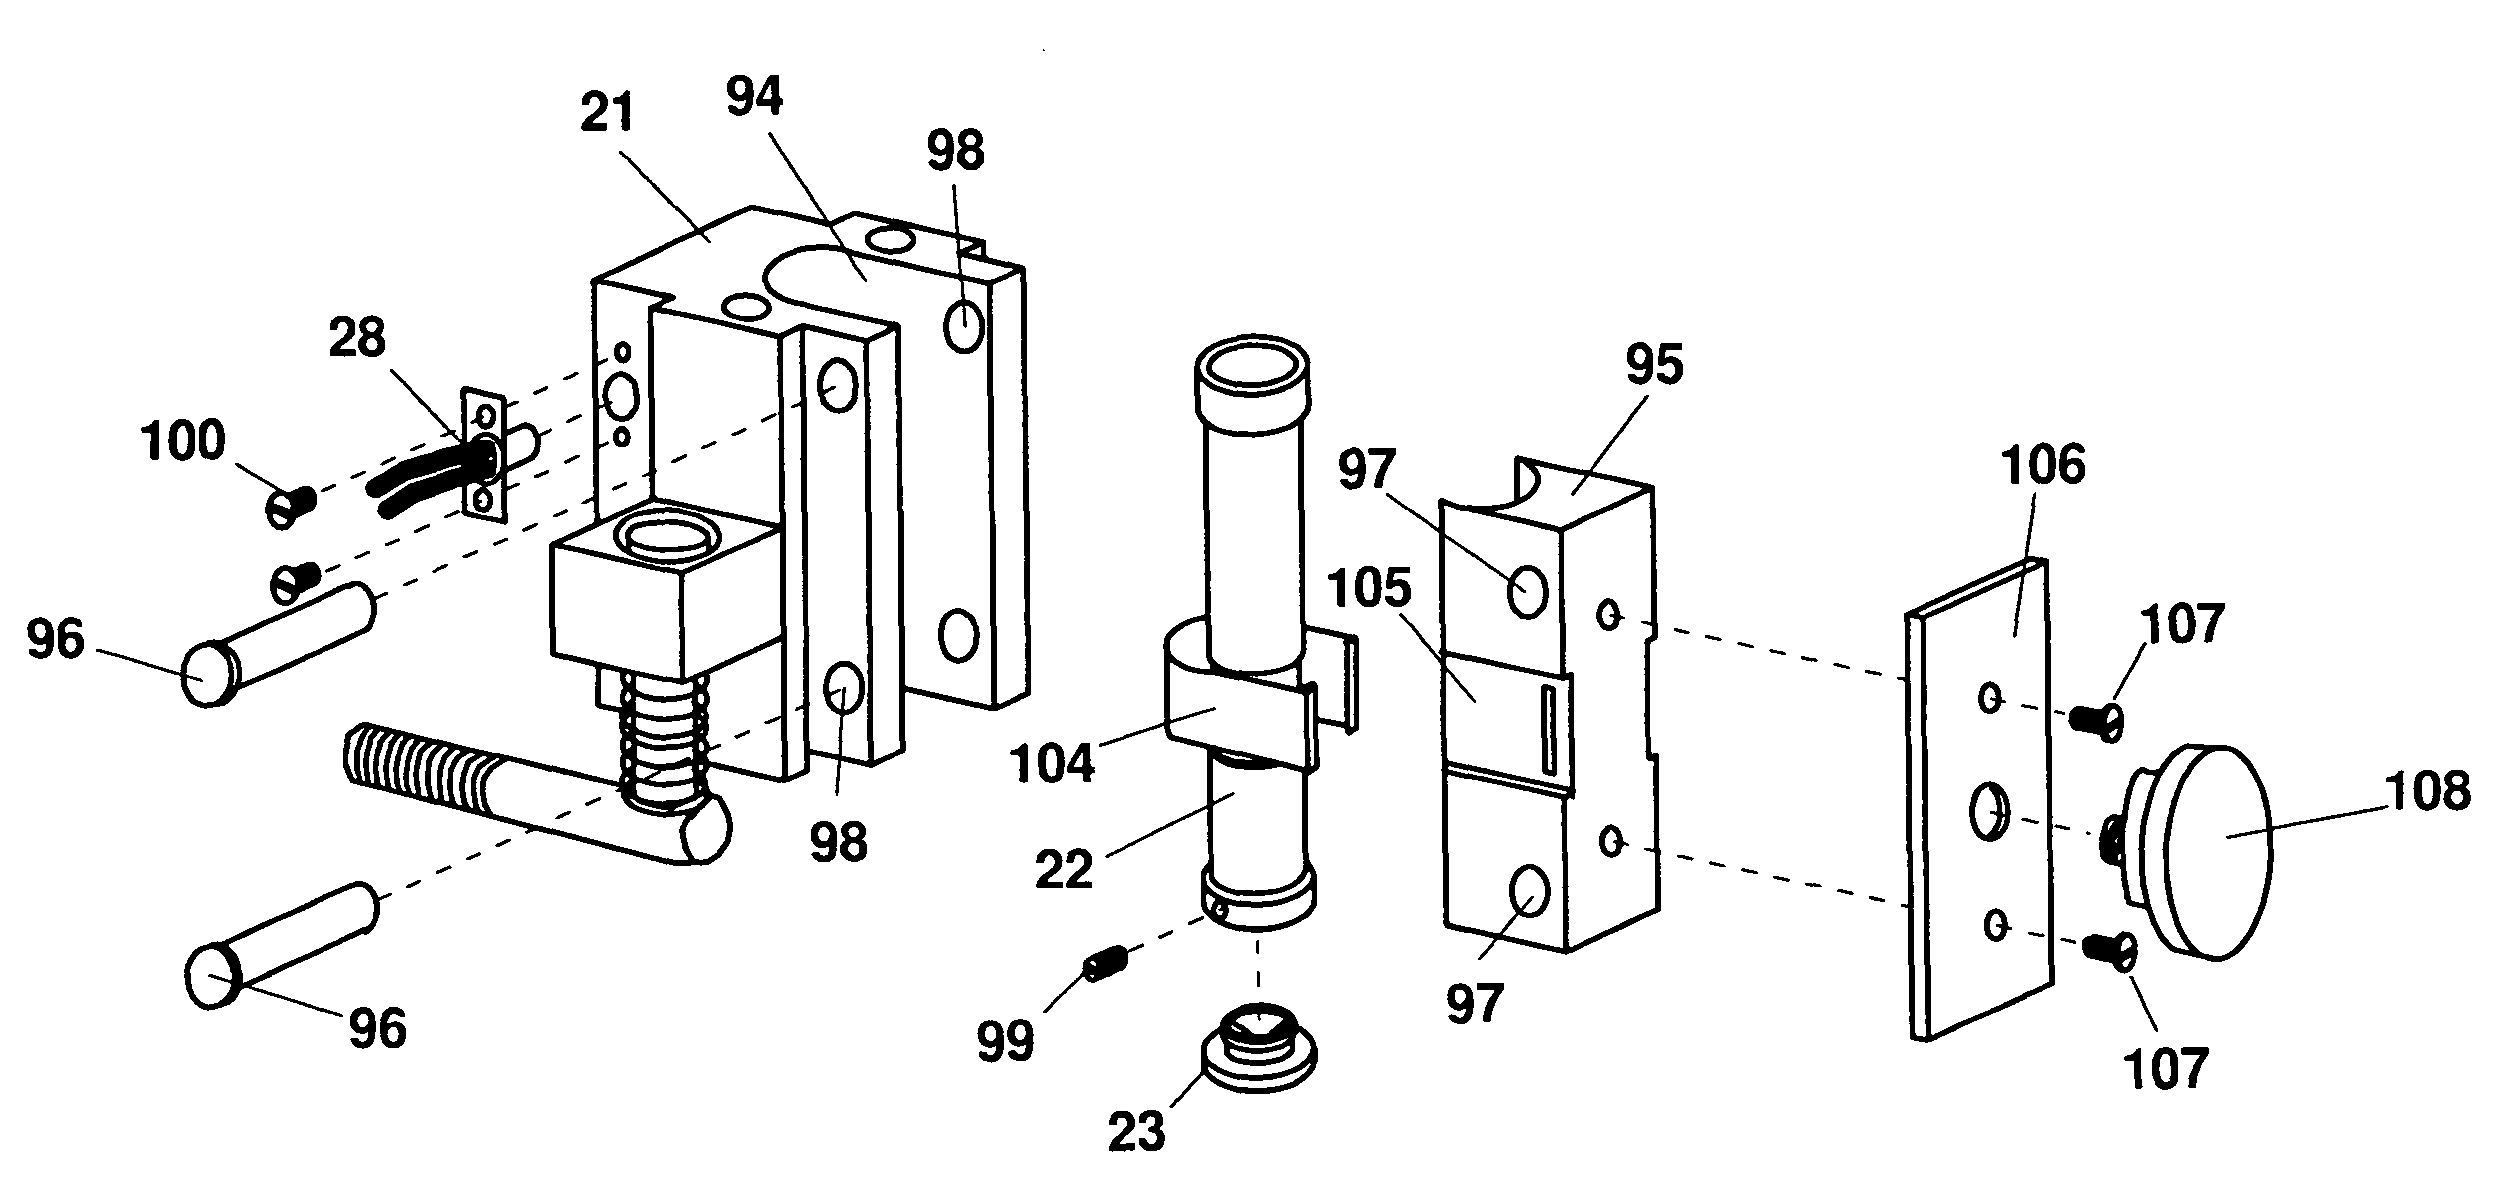 Injection molding apparatus and method of constructing the injection molding apparatus